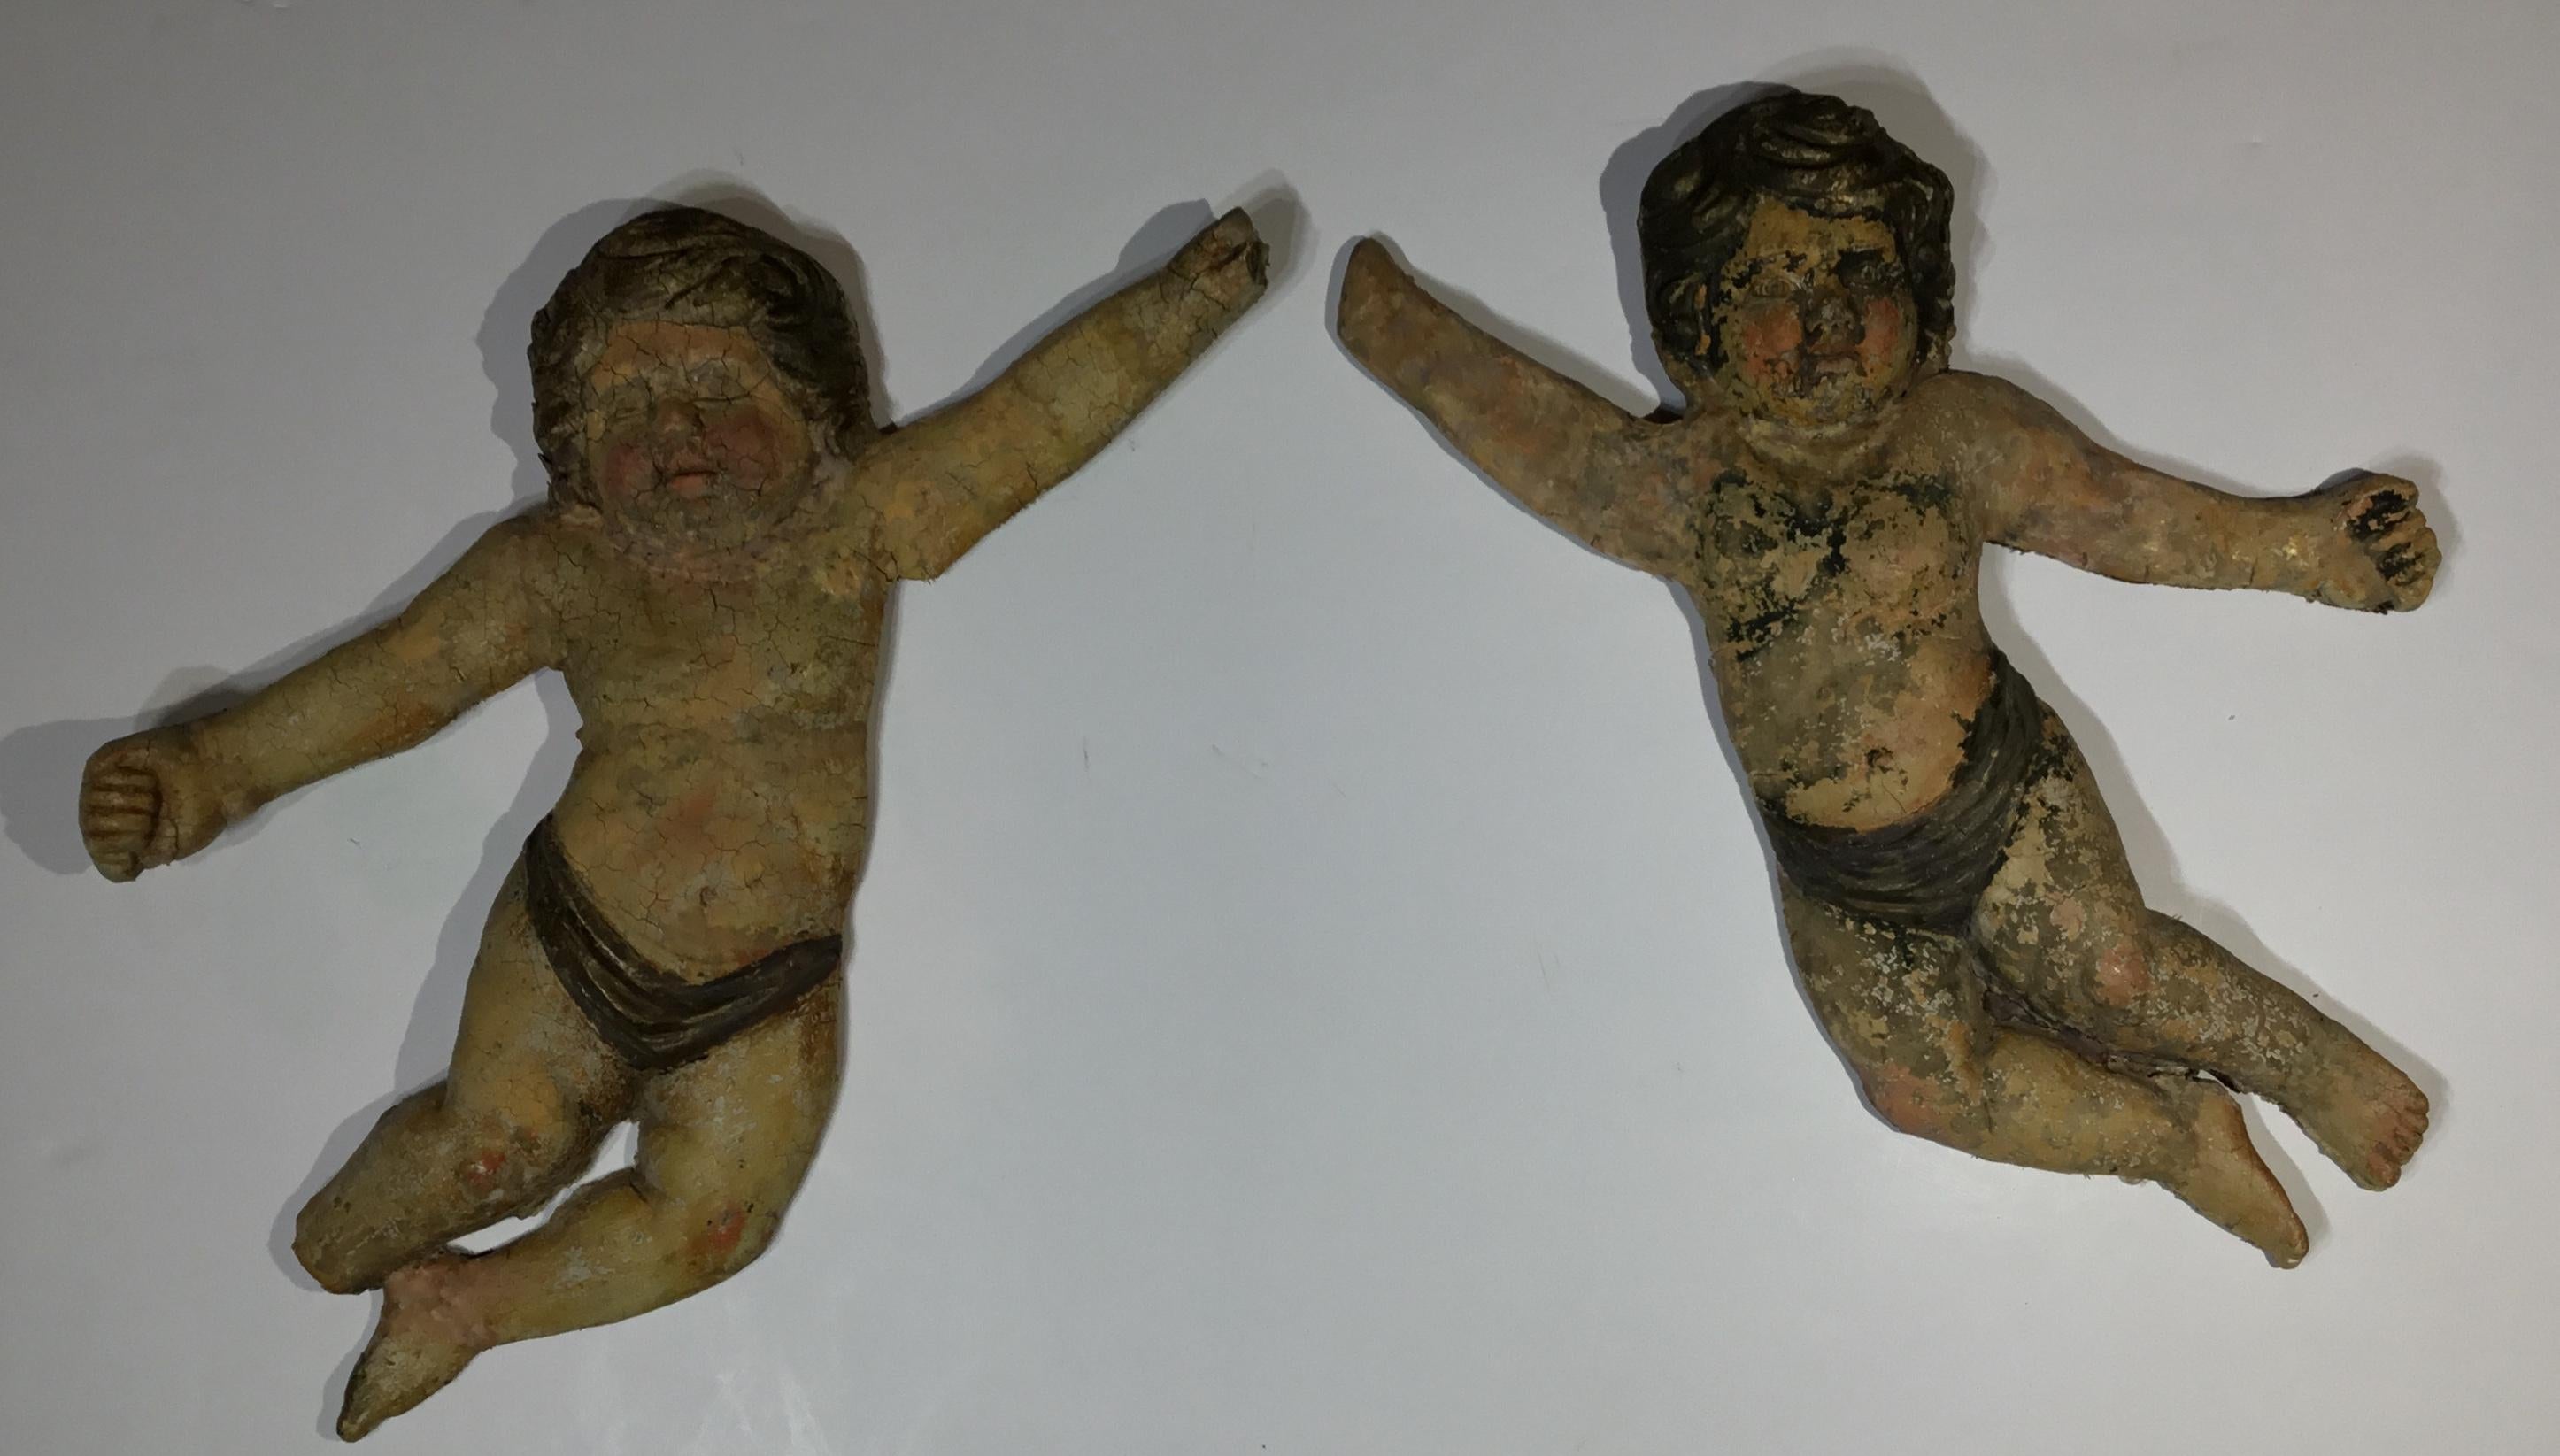 Exceptional pair of antique terra cotta cherub beautifully sculpted by the artist and hand painted. These pair of cherub were salvaged from estate in Italy and professionally restored so they are structurally strong and able to hang on the wall.